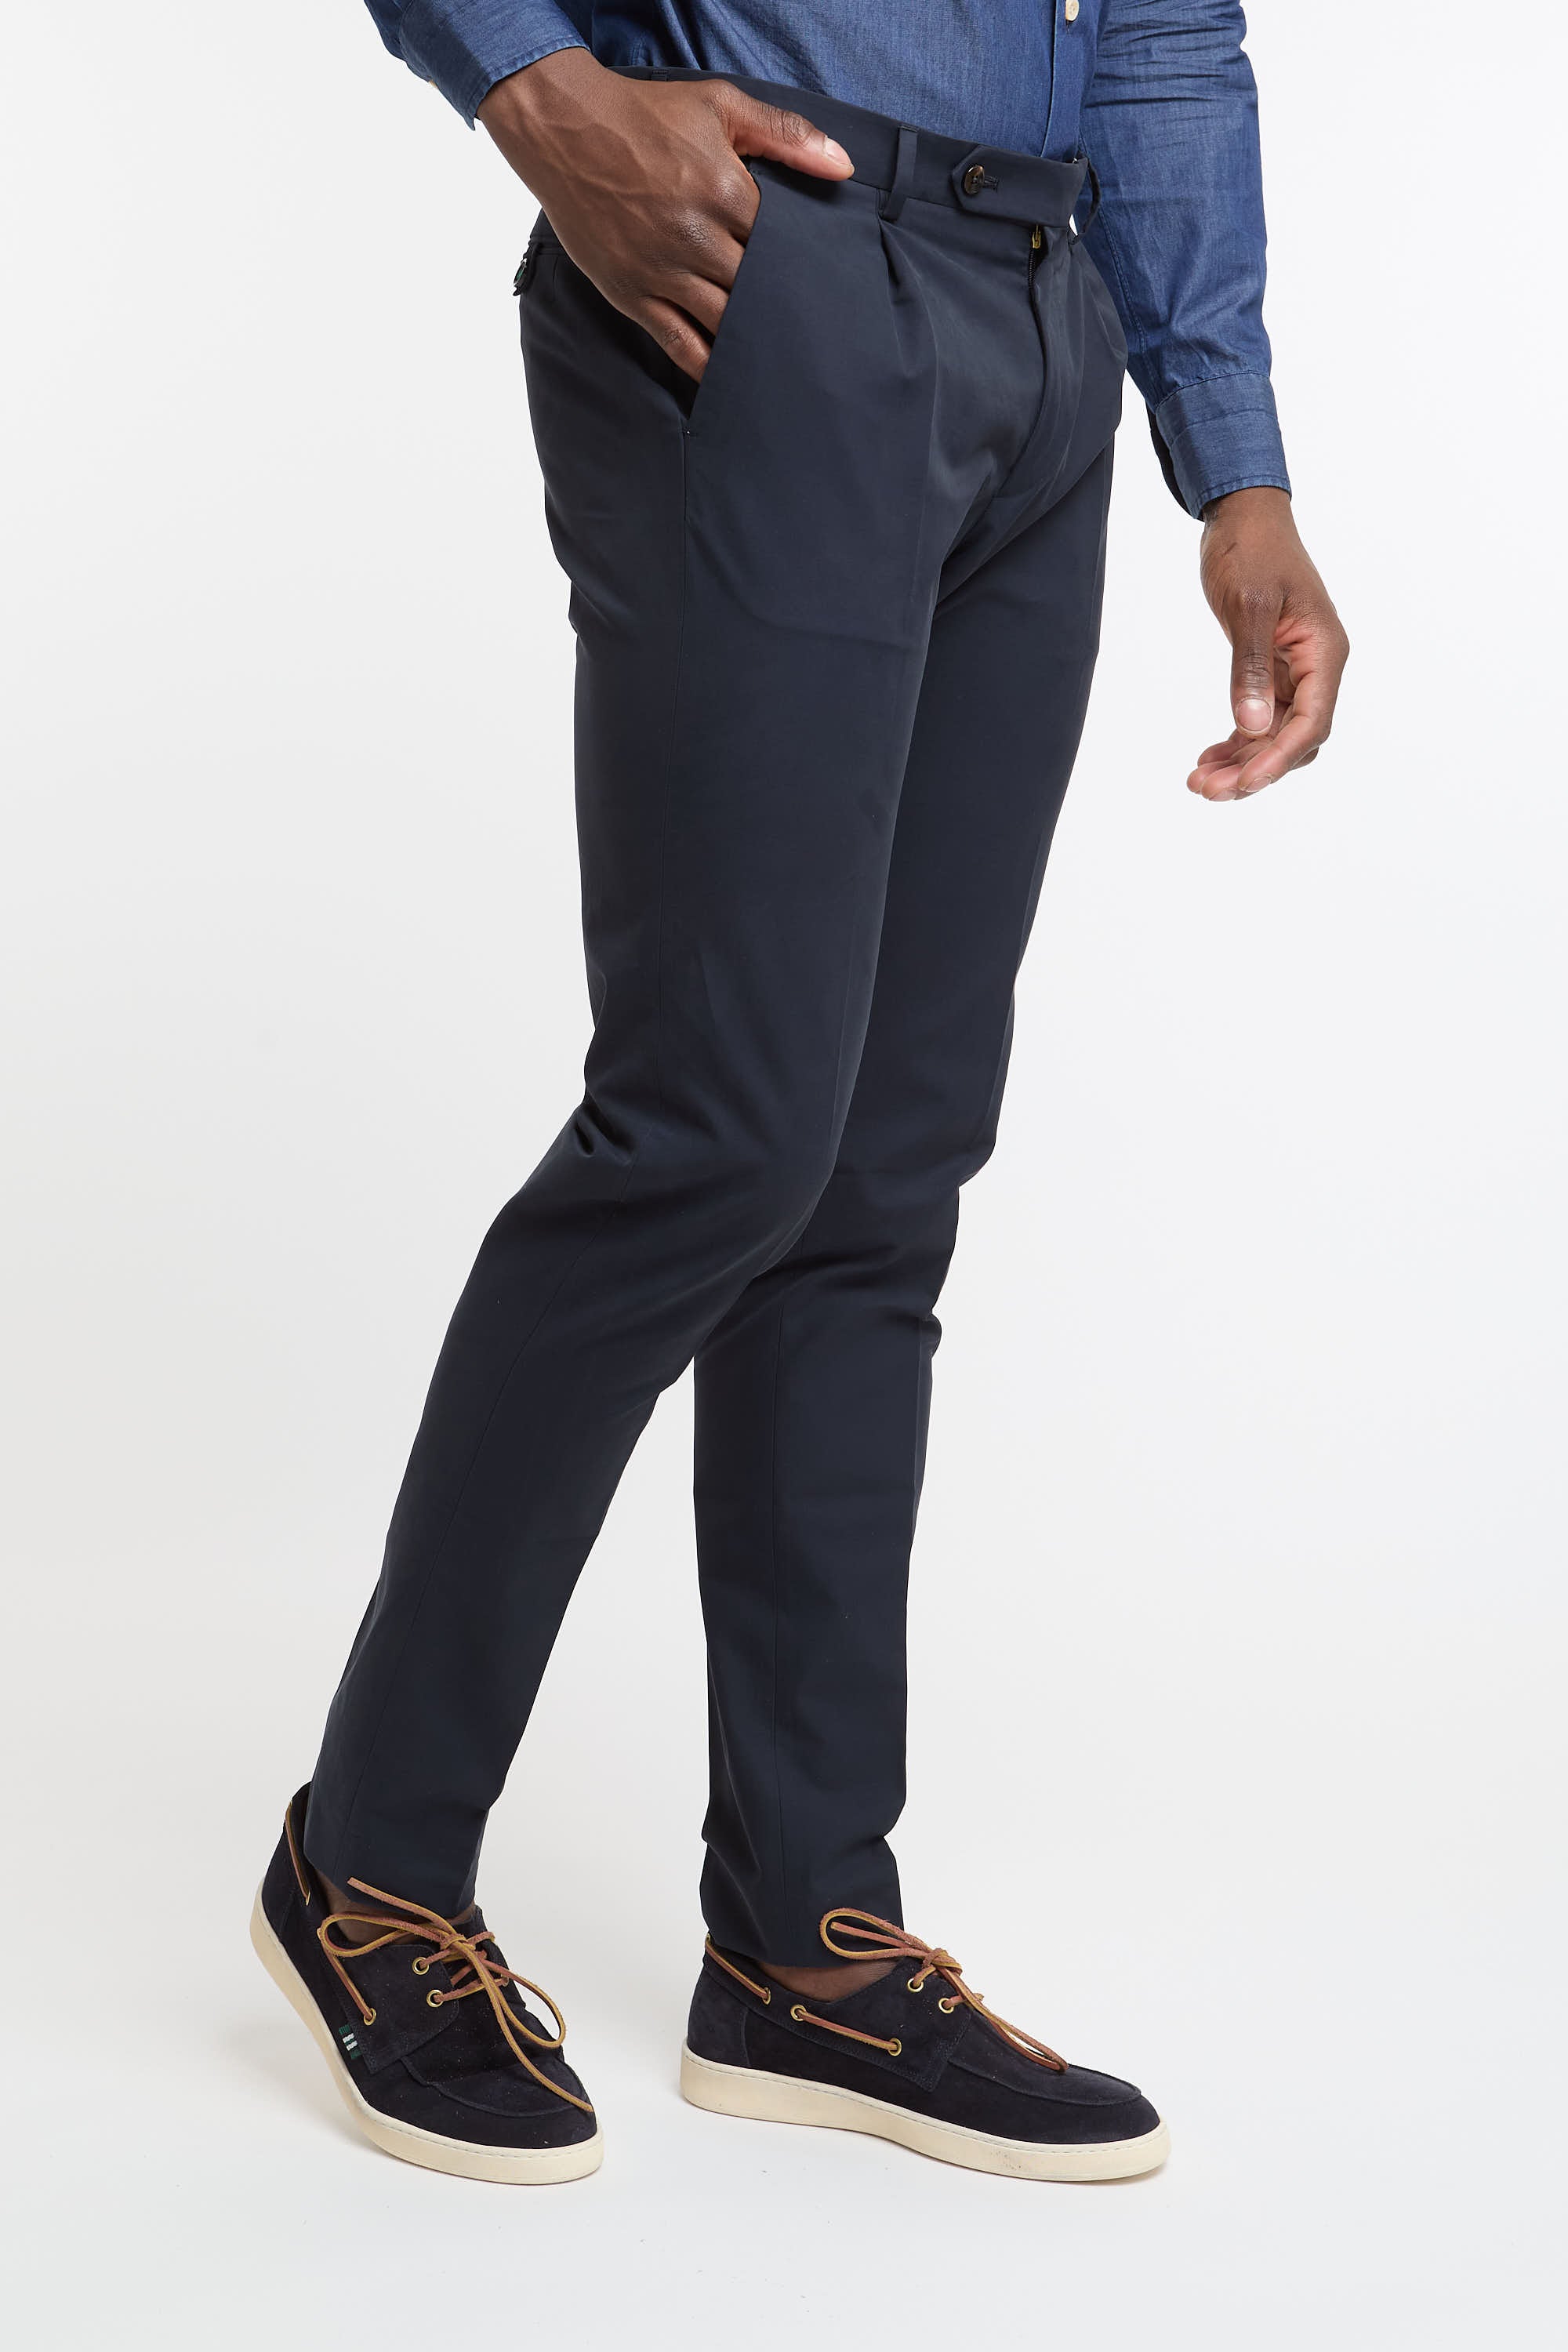 Berwich Pleated Cotton/Polyamide Blue Trousers-1